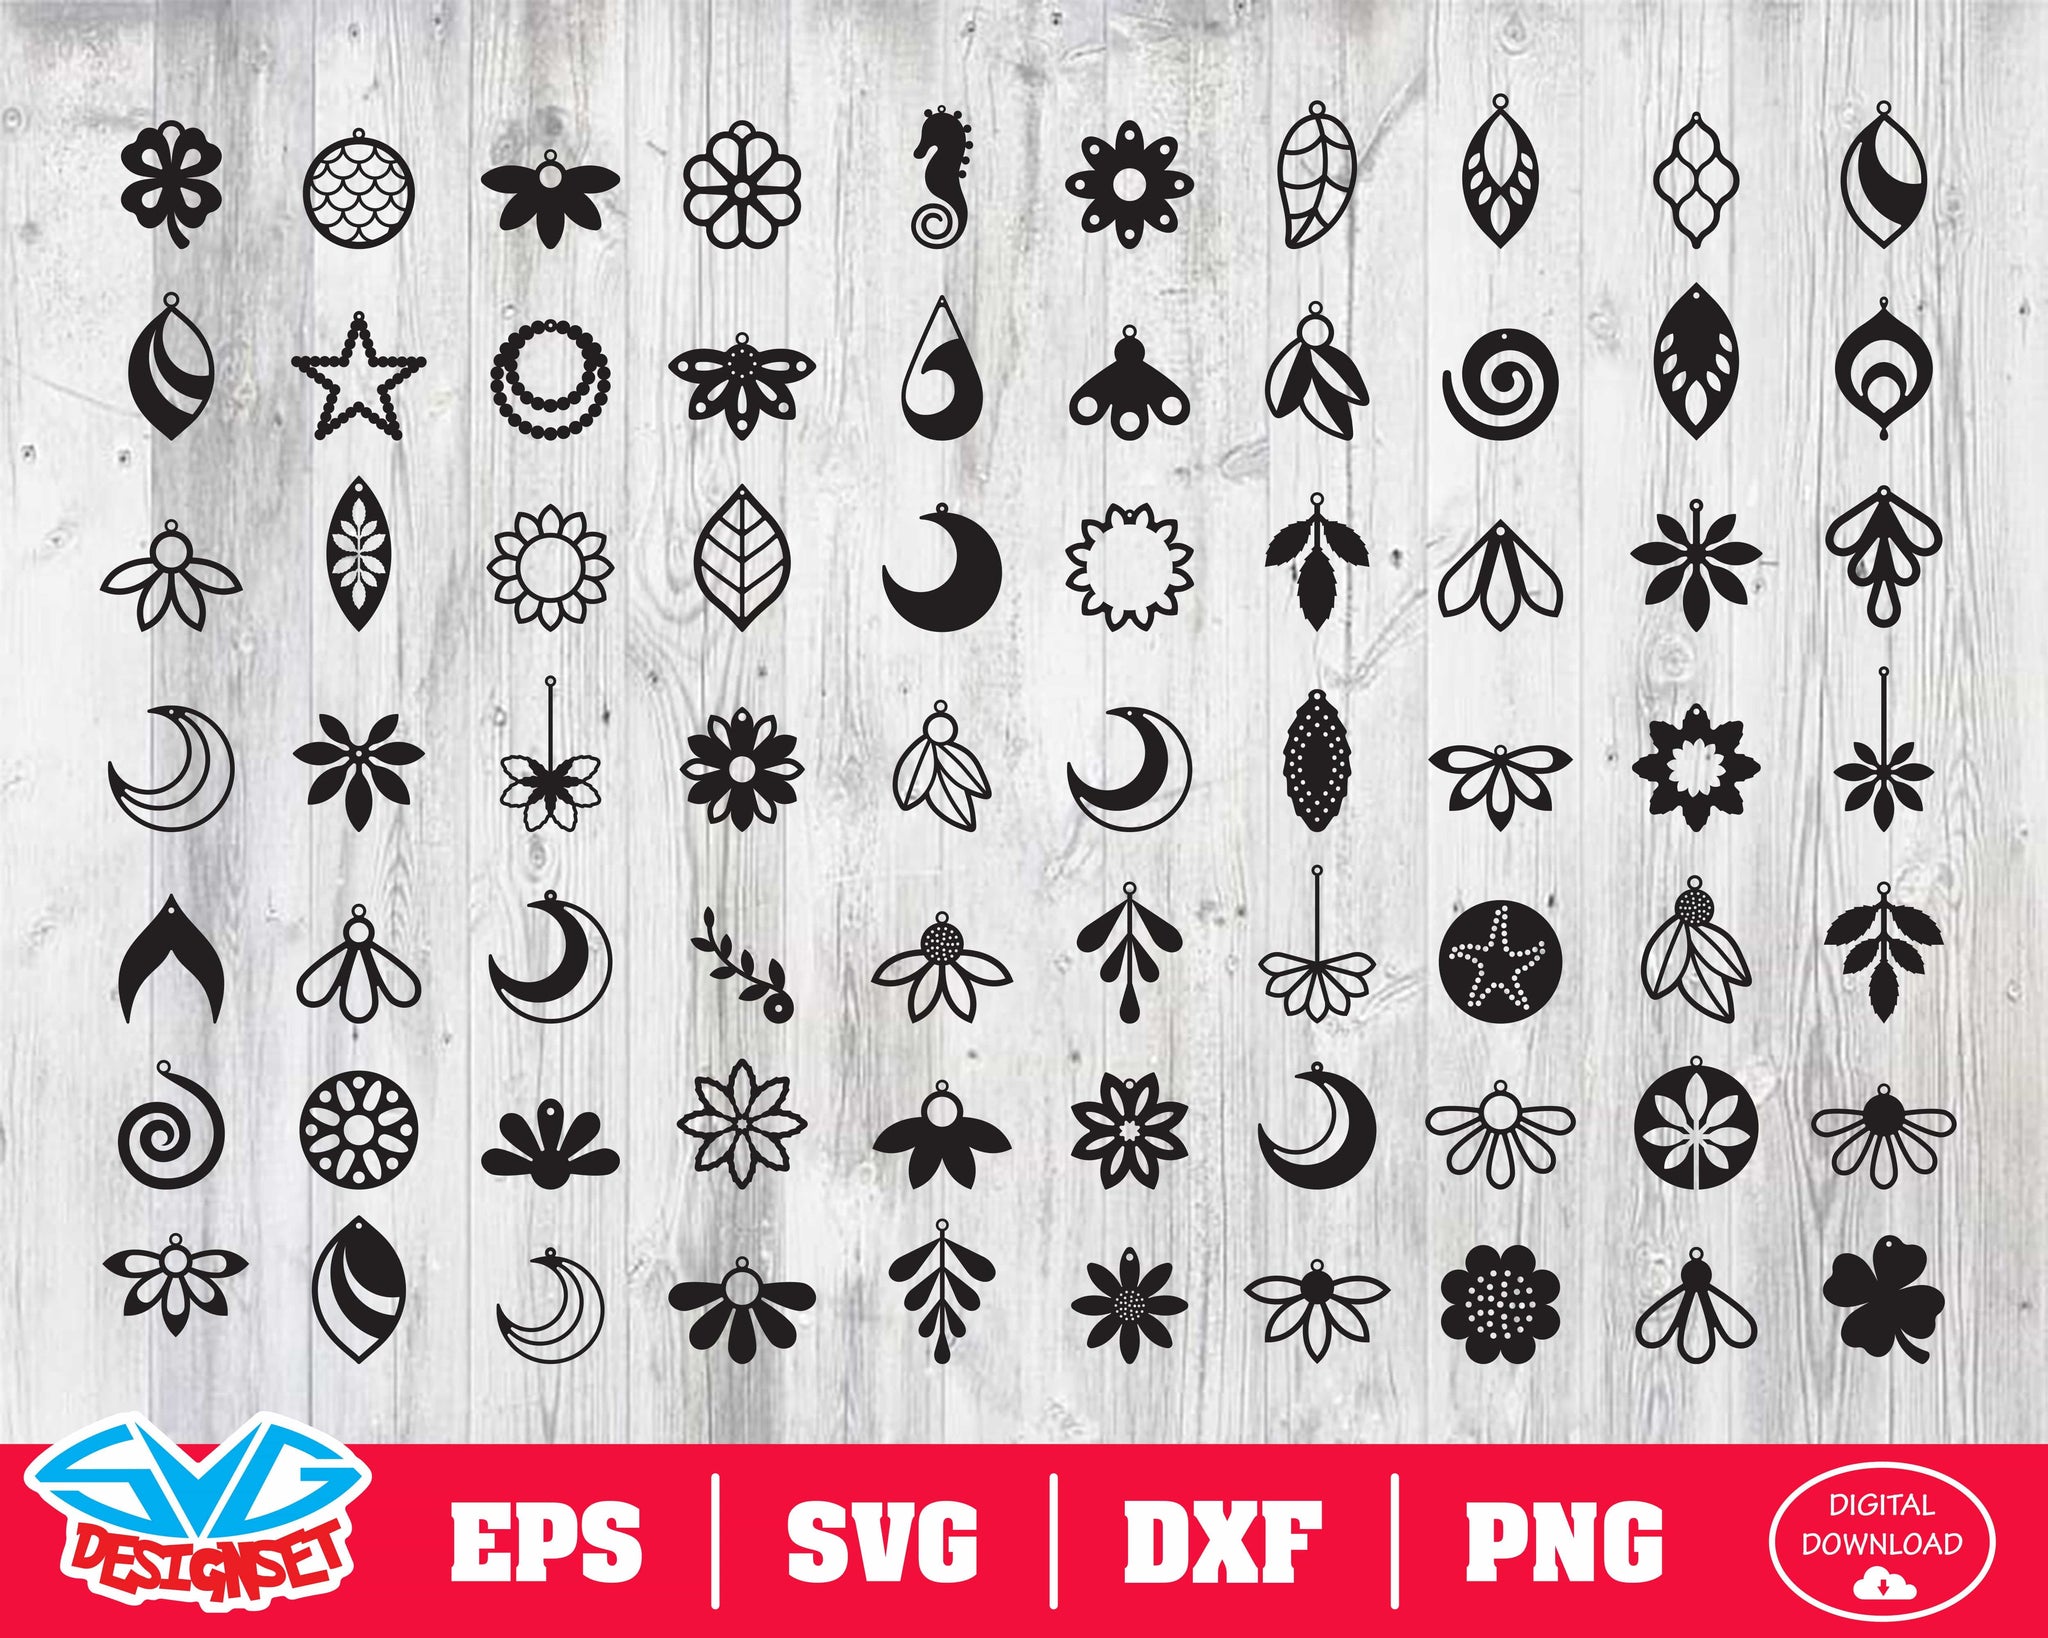 Earring Bundles Svg, Dxf, Eps, Png, Clipart, Silhouette and Cutfiles - SVGDesignSets